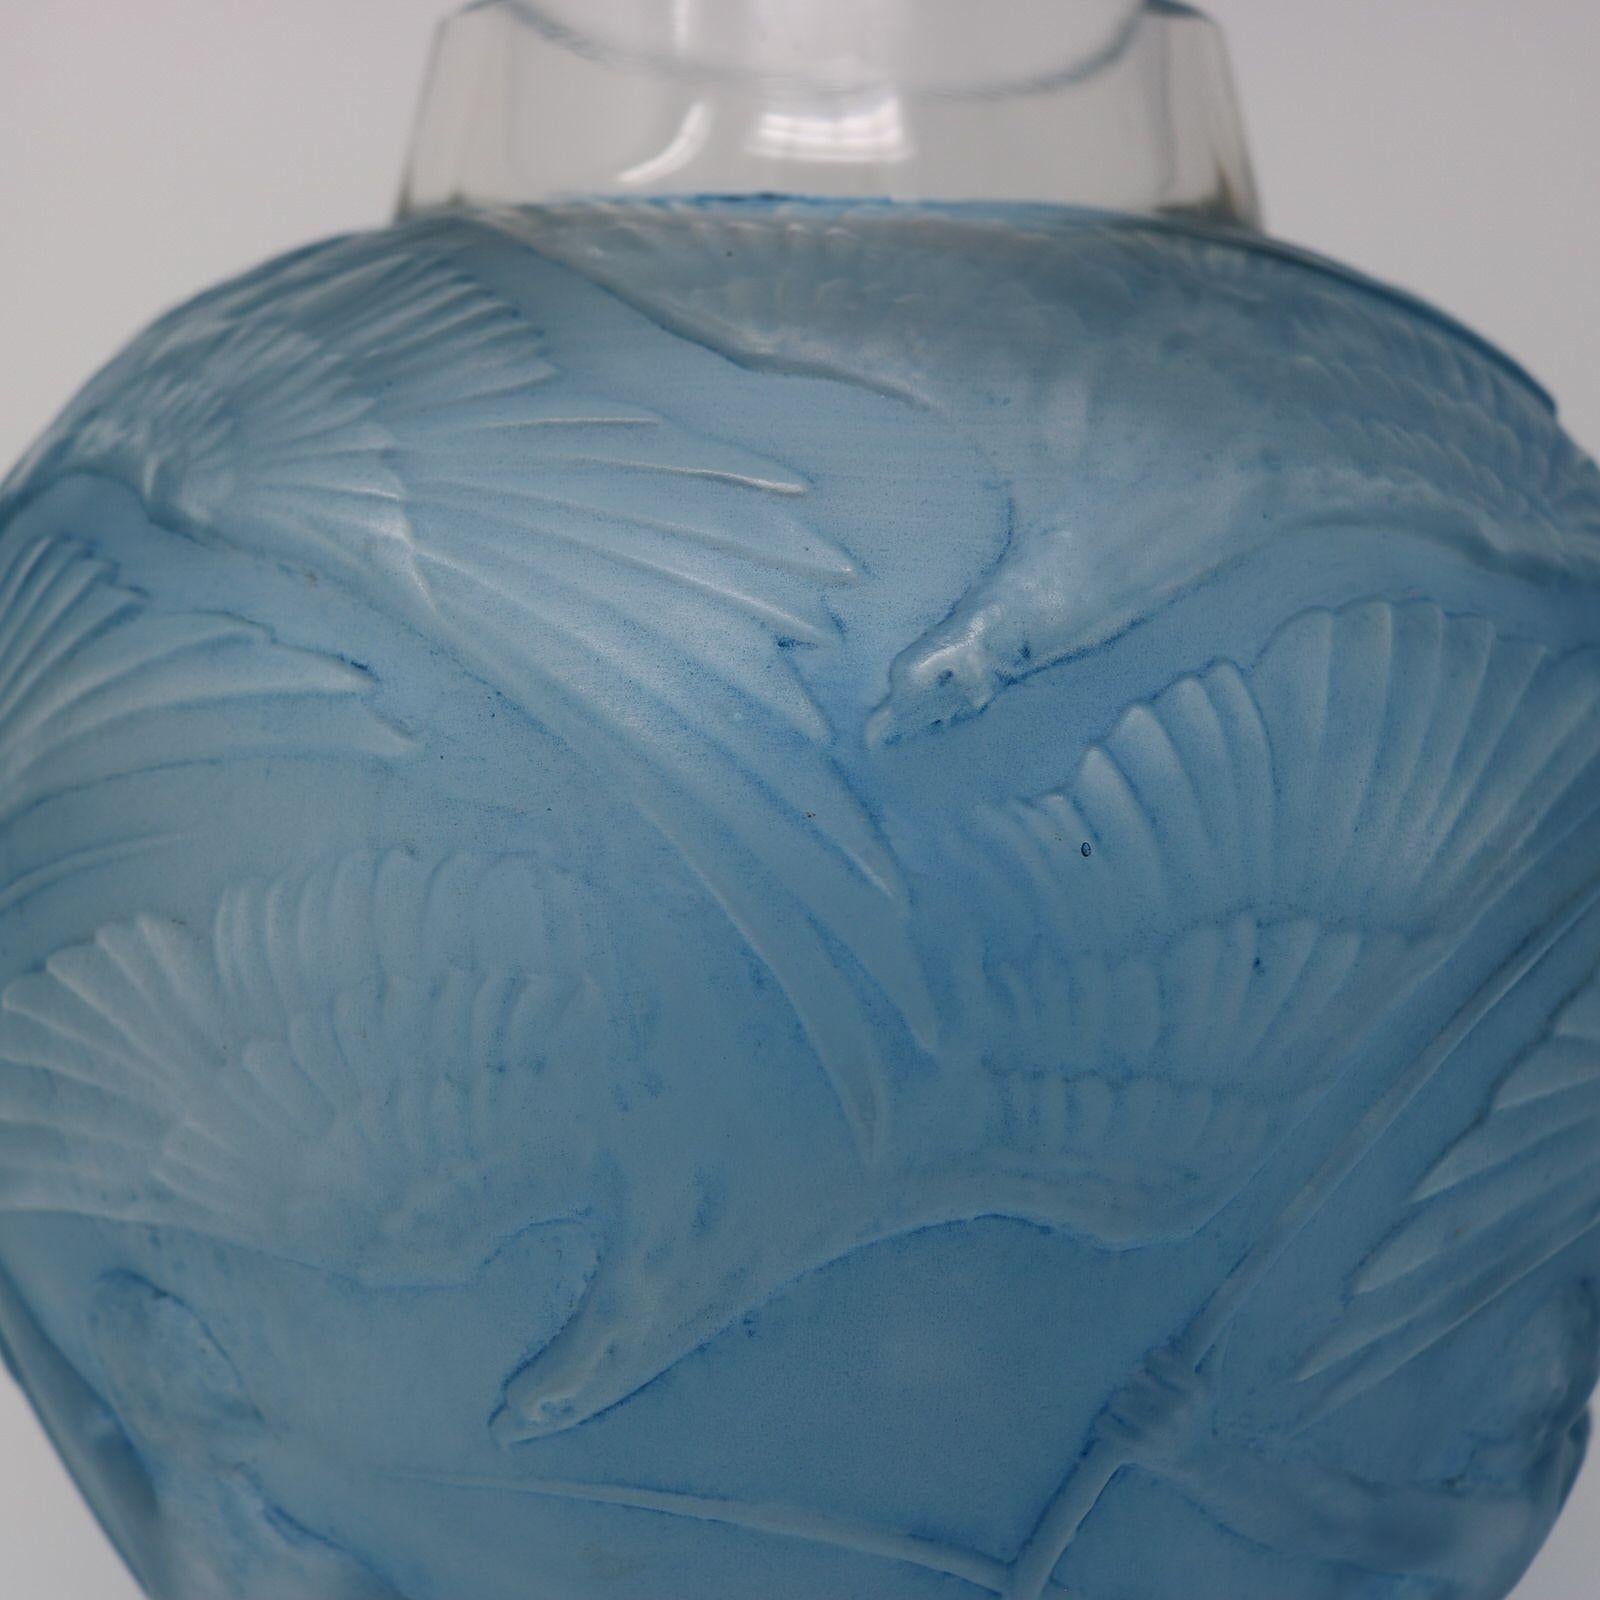 Rene Lalique Glass Archers Vase, Blue Stained 2